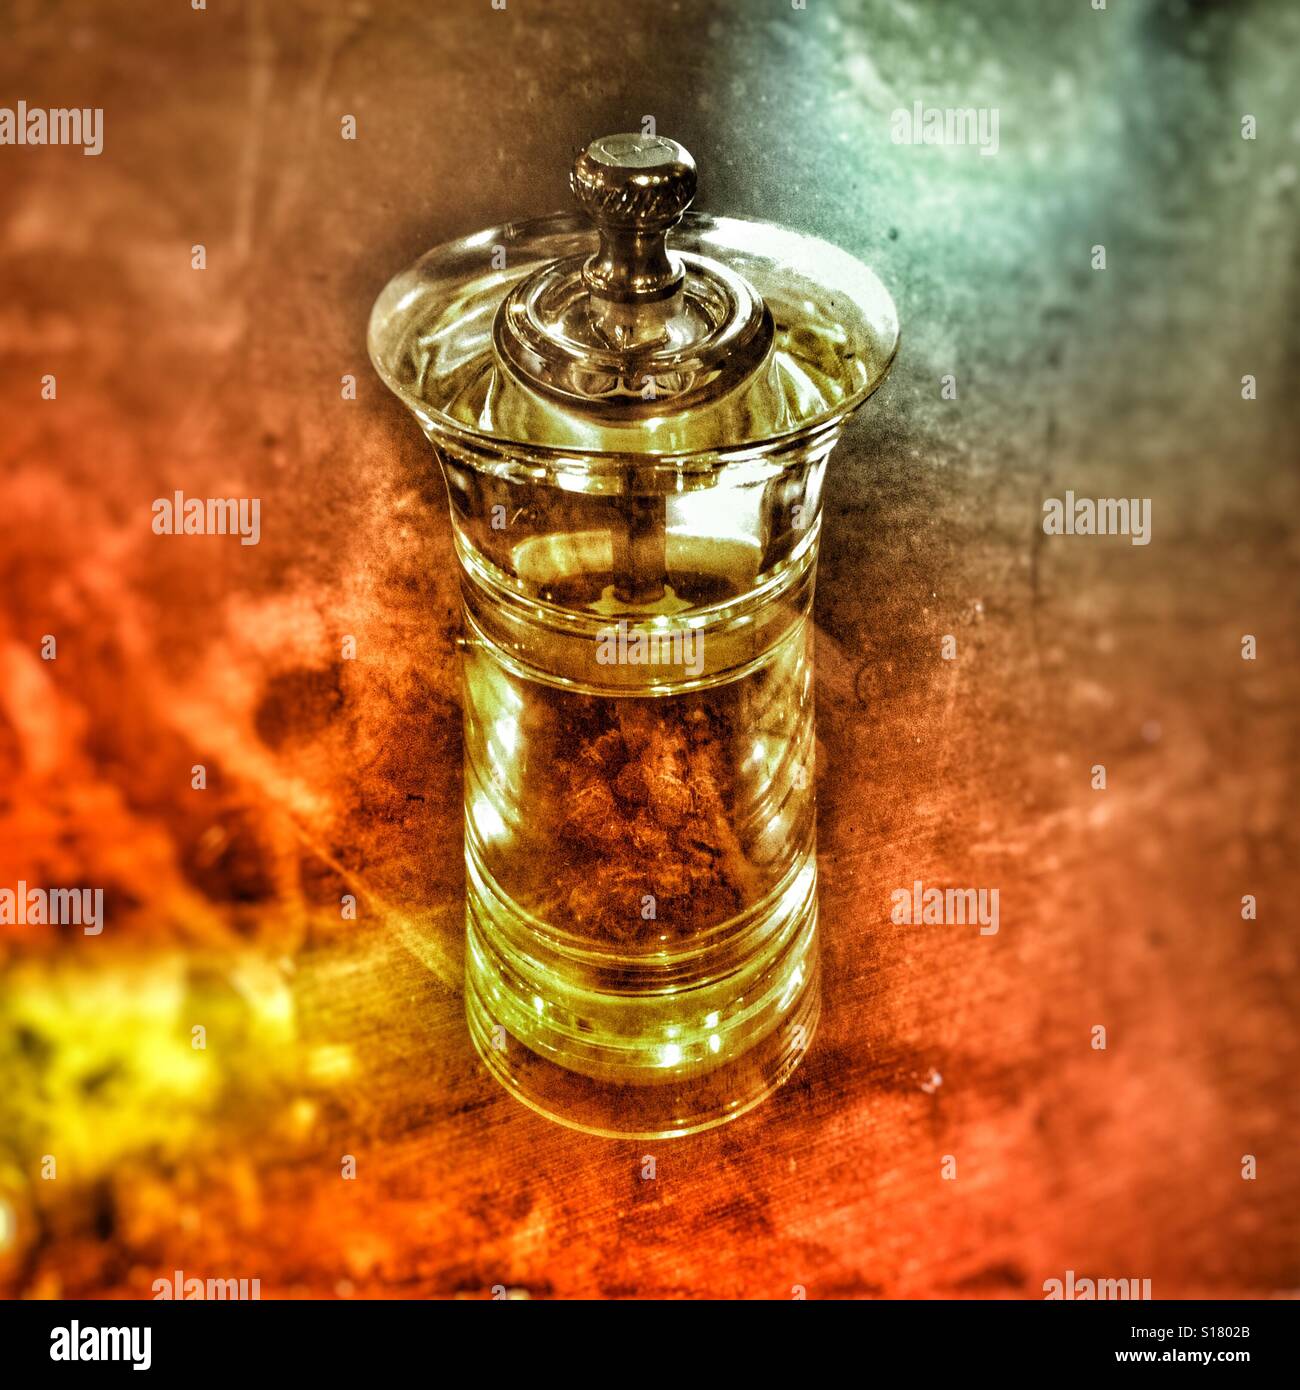 Download Pepper Grinder High Resolution Stock Photography And Images Alamy Yellowimages Mockups